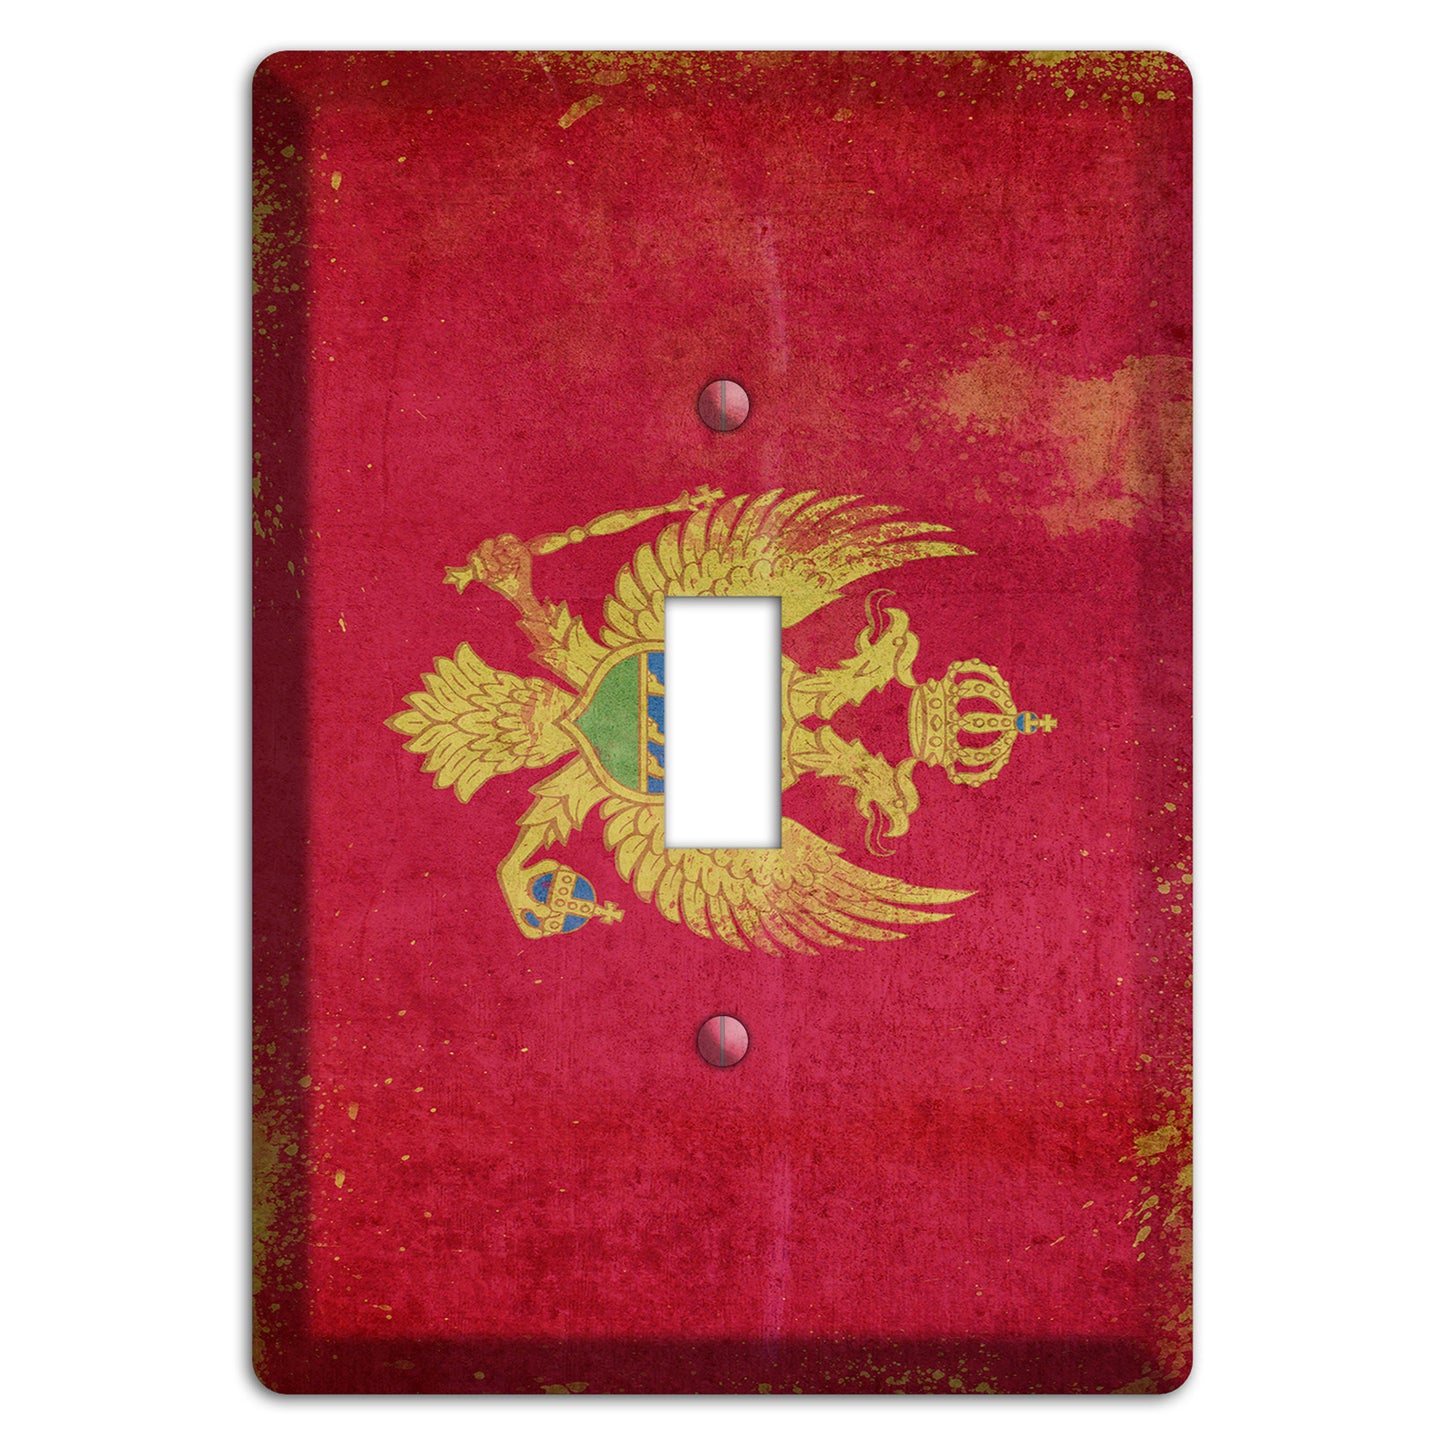 Montenegro Cover Plates Cover Plates